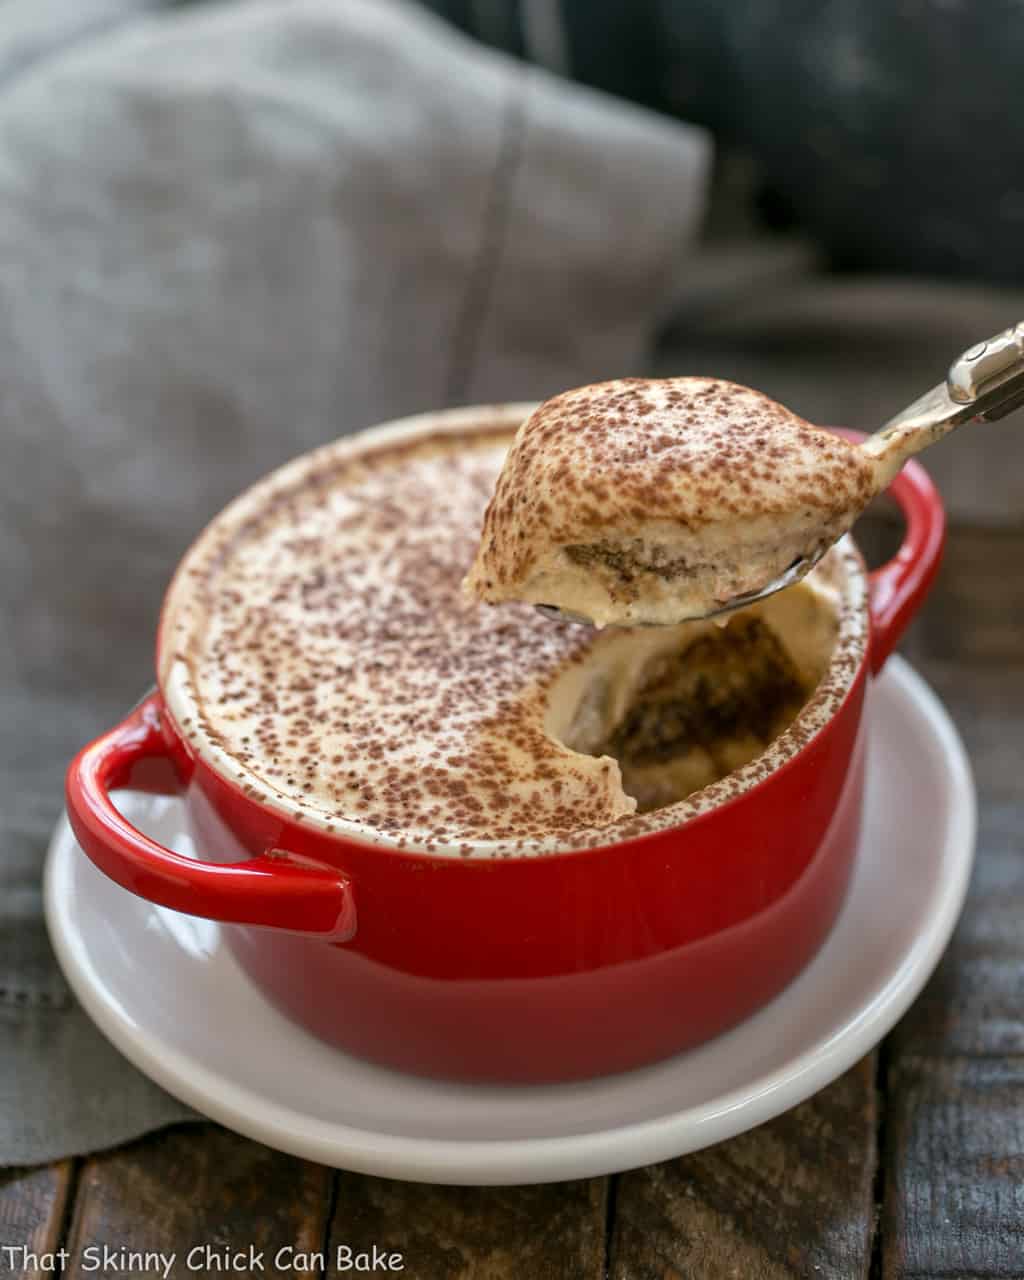 Kahlua Tiramisu for Two in a red cocotte with a spoon.